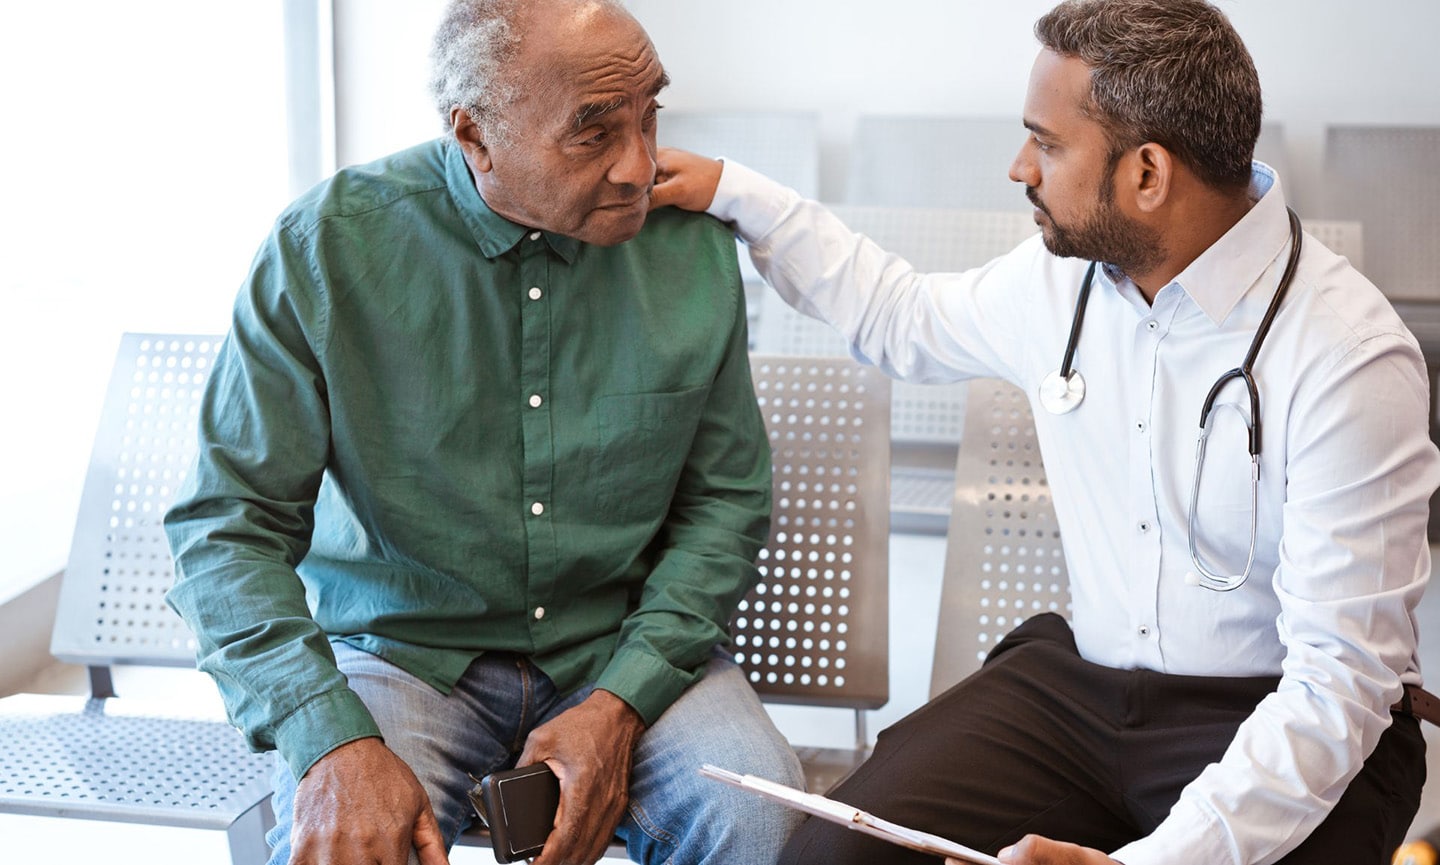 A doctor greets a patient in the waiting room of an FQHC.